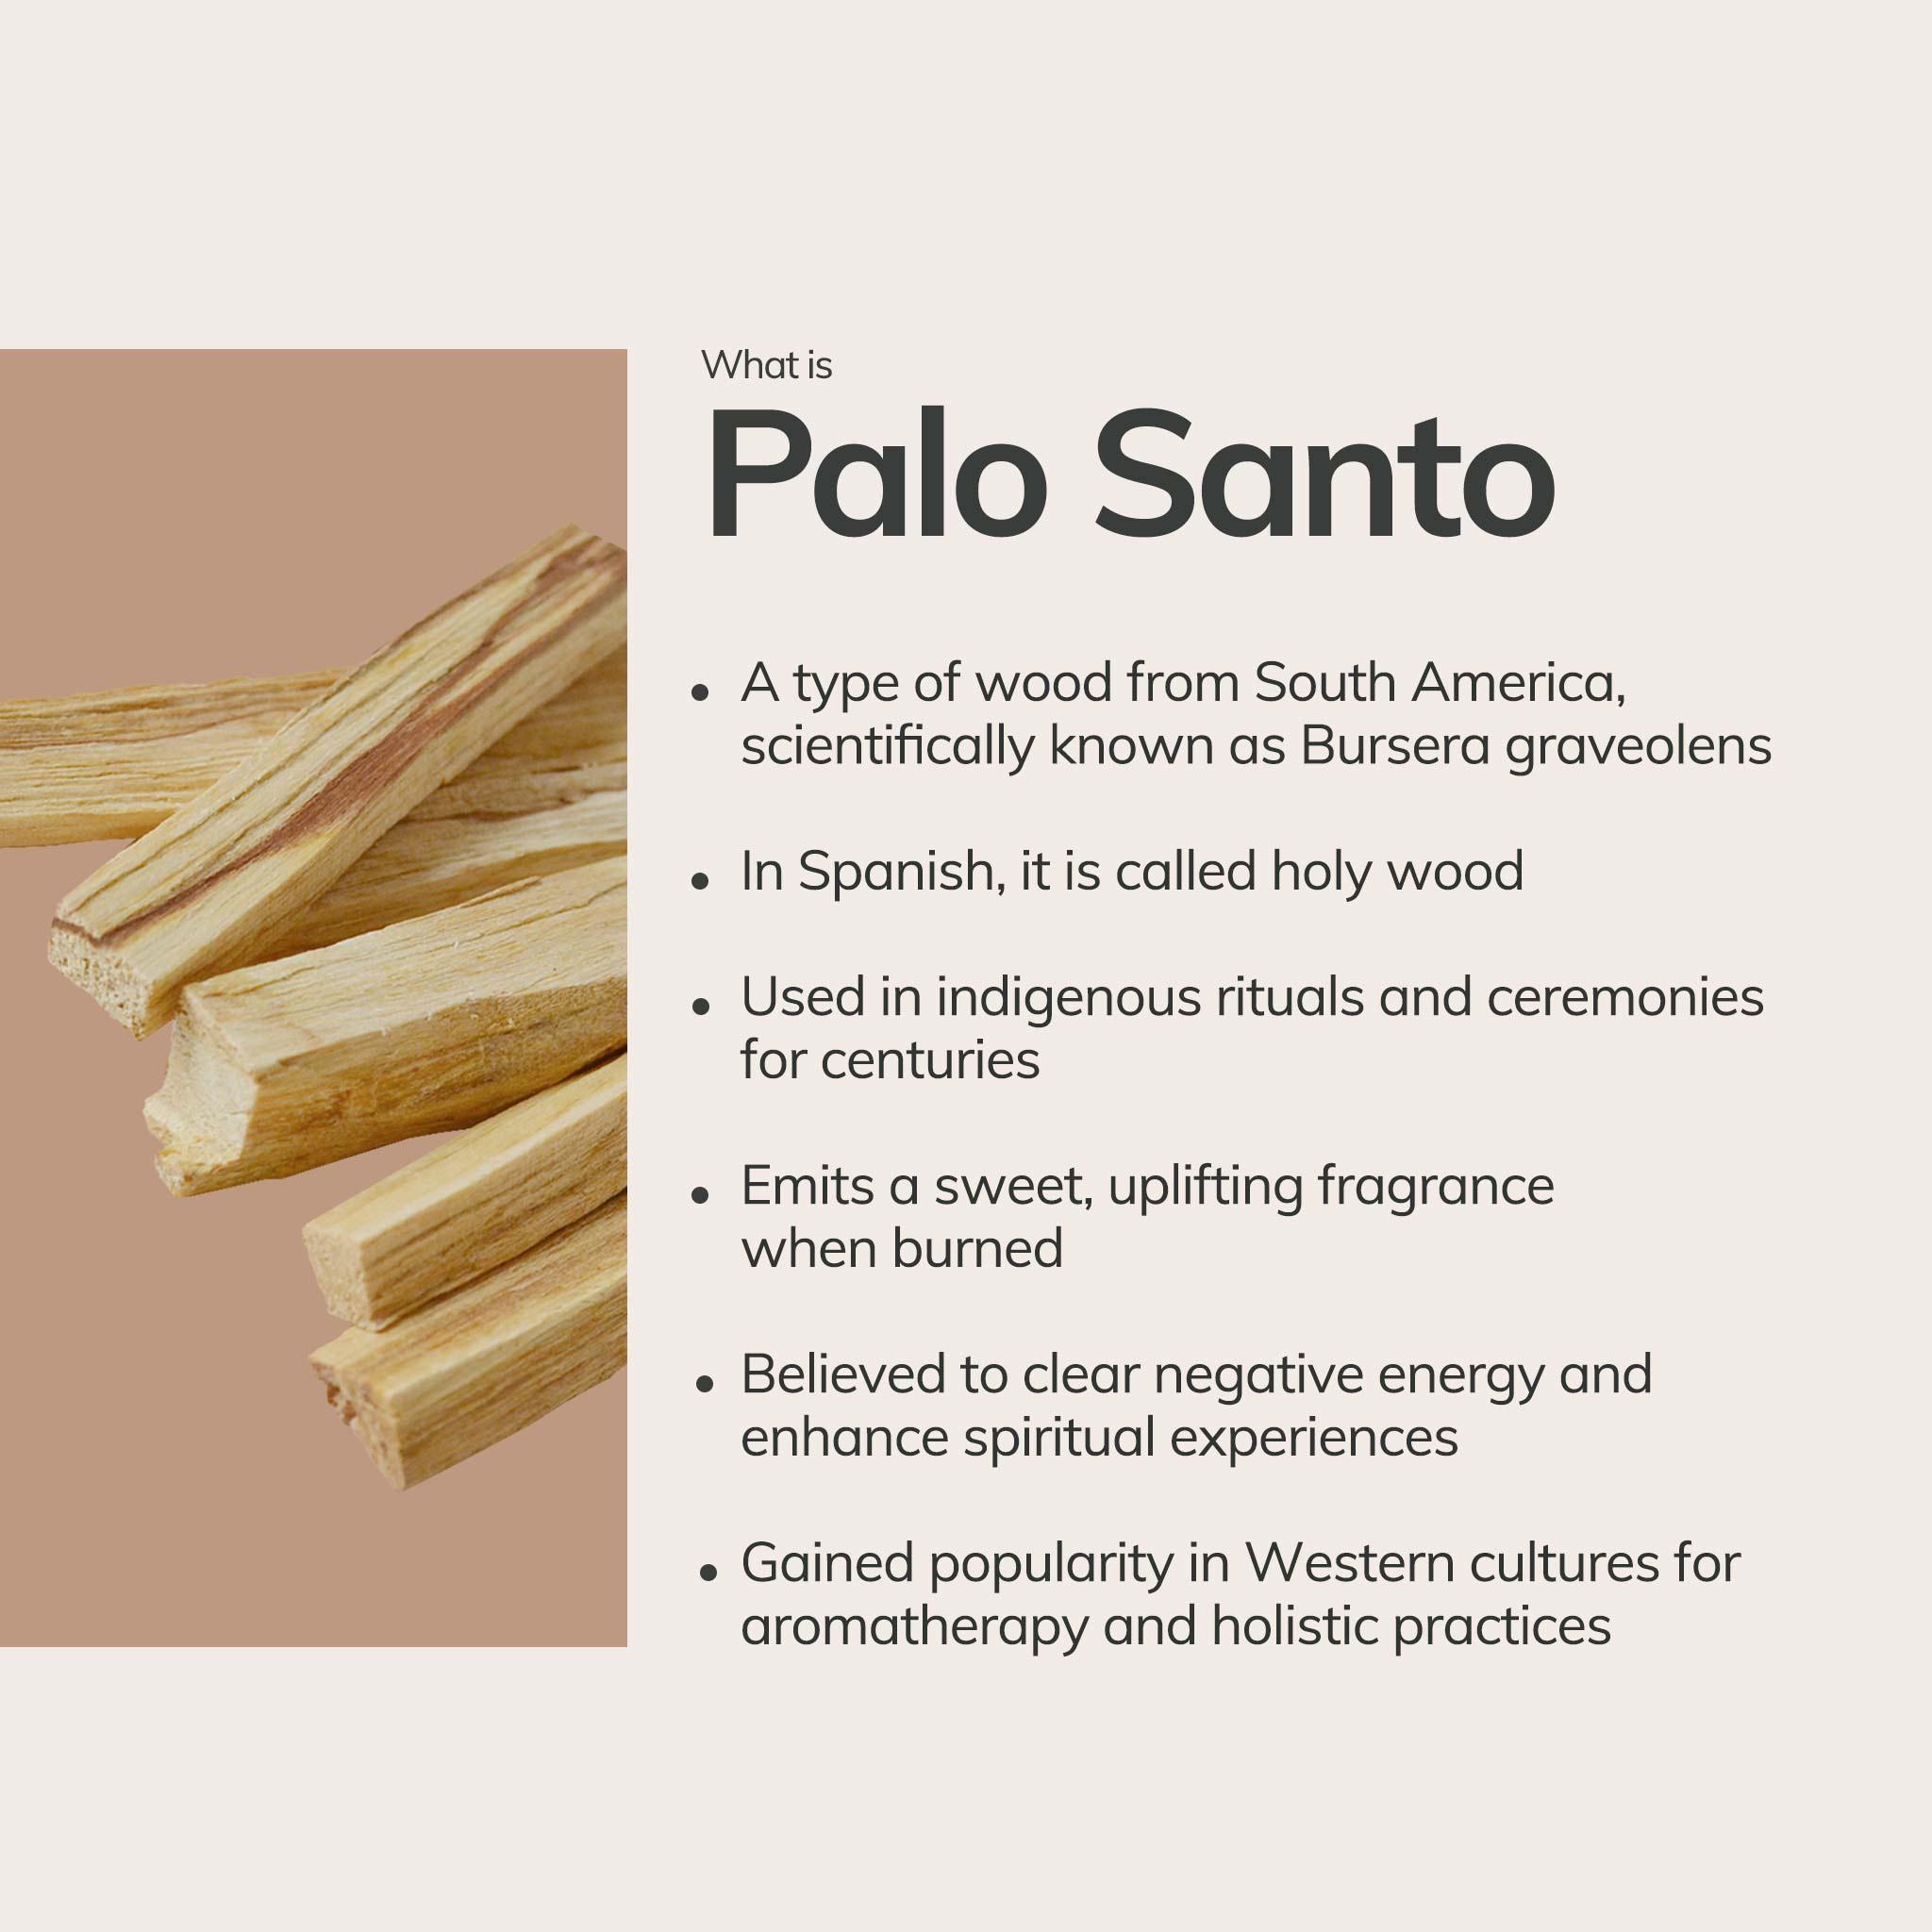 Left: Peru palo santo wood sticks; right: bullet list telling what is palo santo used for.